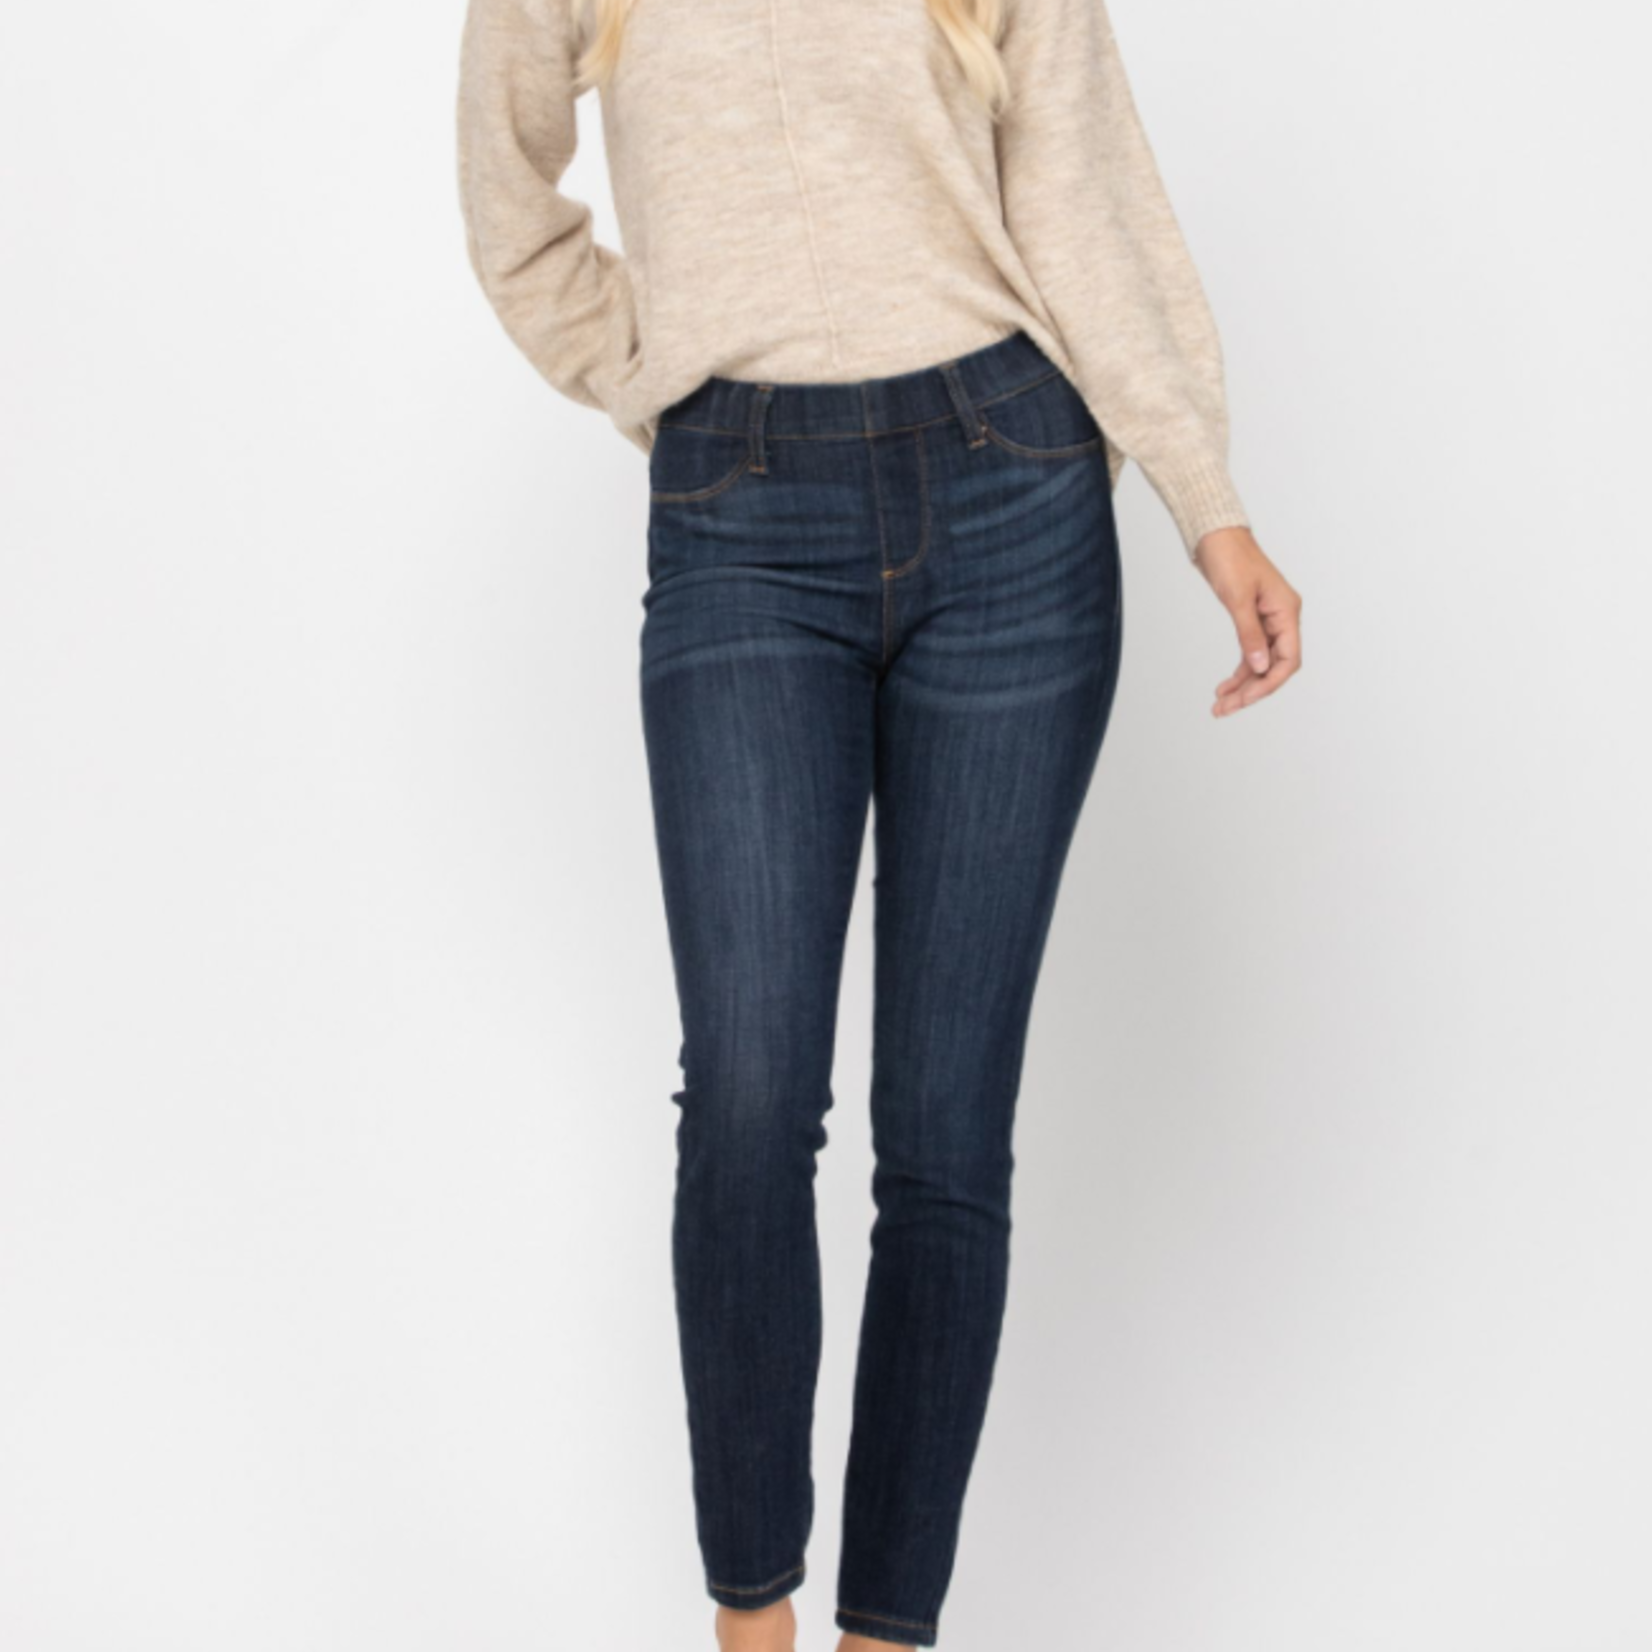 Judy Blue mid-rise Jeggings: Light Wash